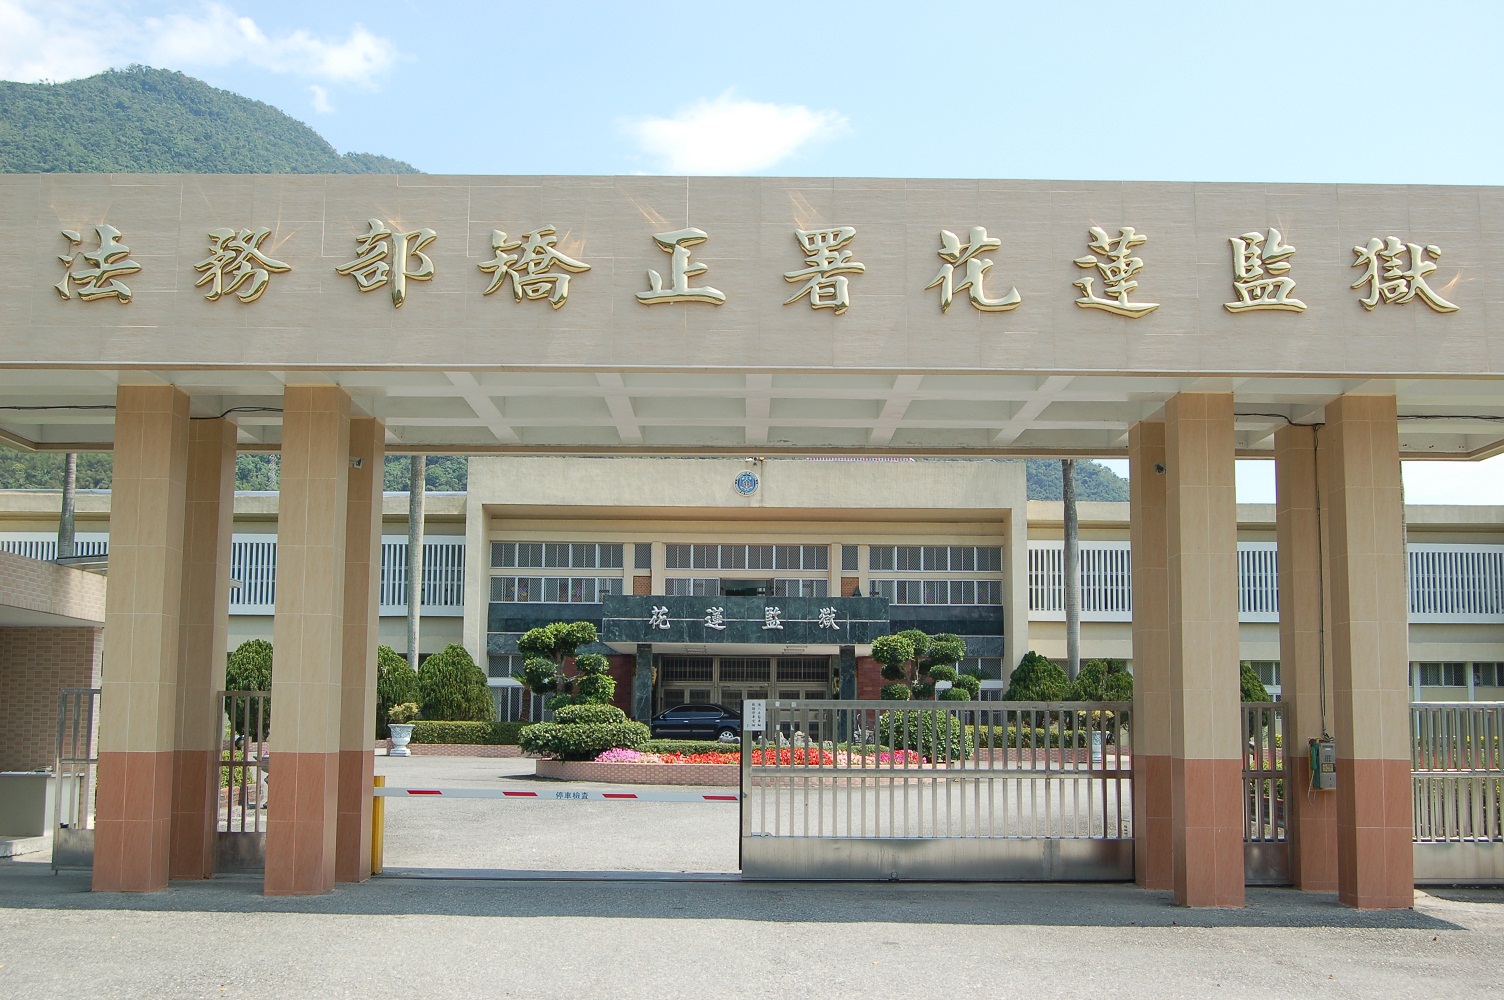 The new prison located at Ji-an Townshop renamed Hualien Prison, Agency of Corrections, Ministry of Jistice - since 2011